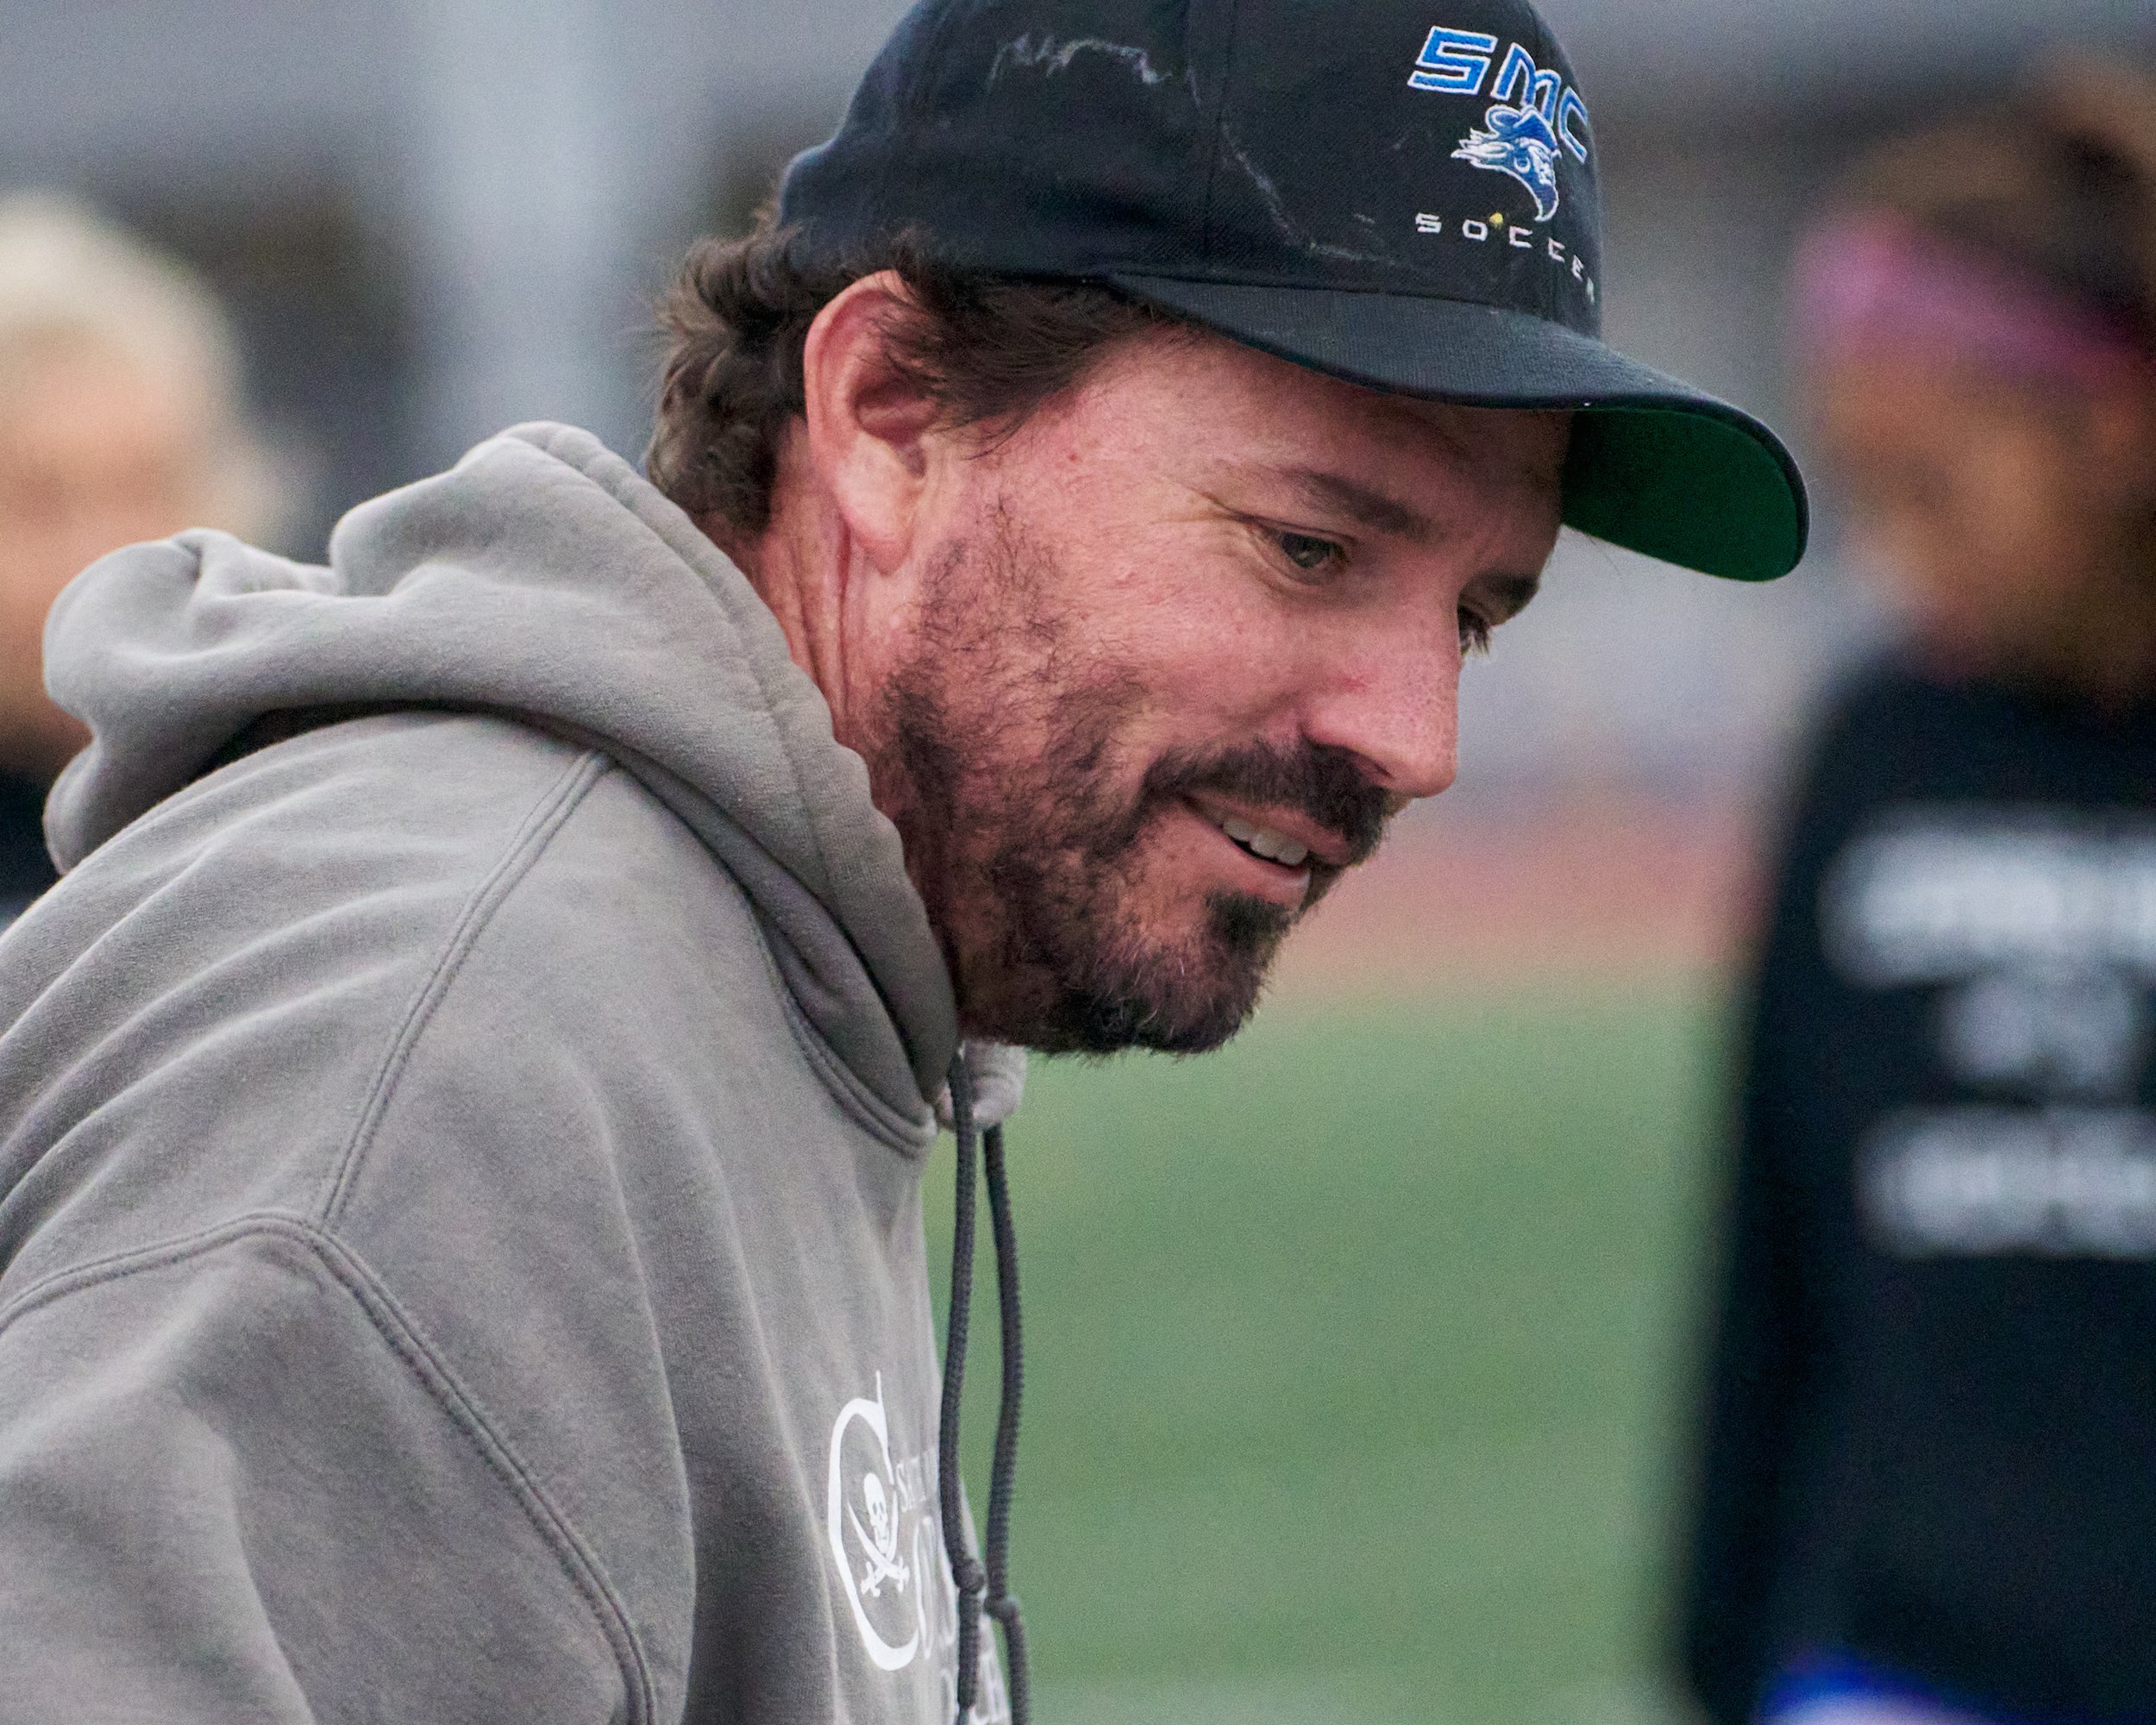  Santa Monica College Corsairs Women's Soccer Head Coach Aaron Benditson during the women's soccer match against the Los Angeles Valley College Monarchs on Tuesday, Nov. 1, 2022, at Corsair Field in Santa Monica, Calif. The Corsairs won 2-1. (Nichola